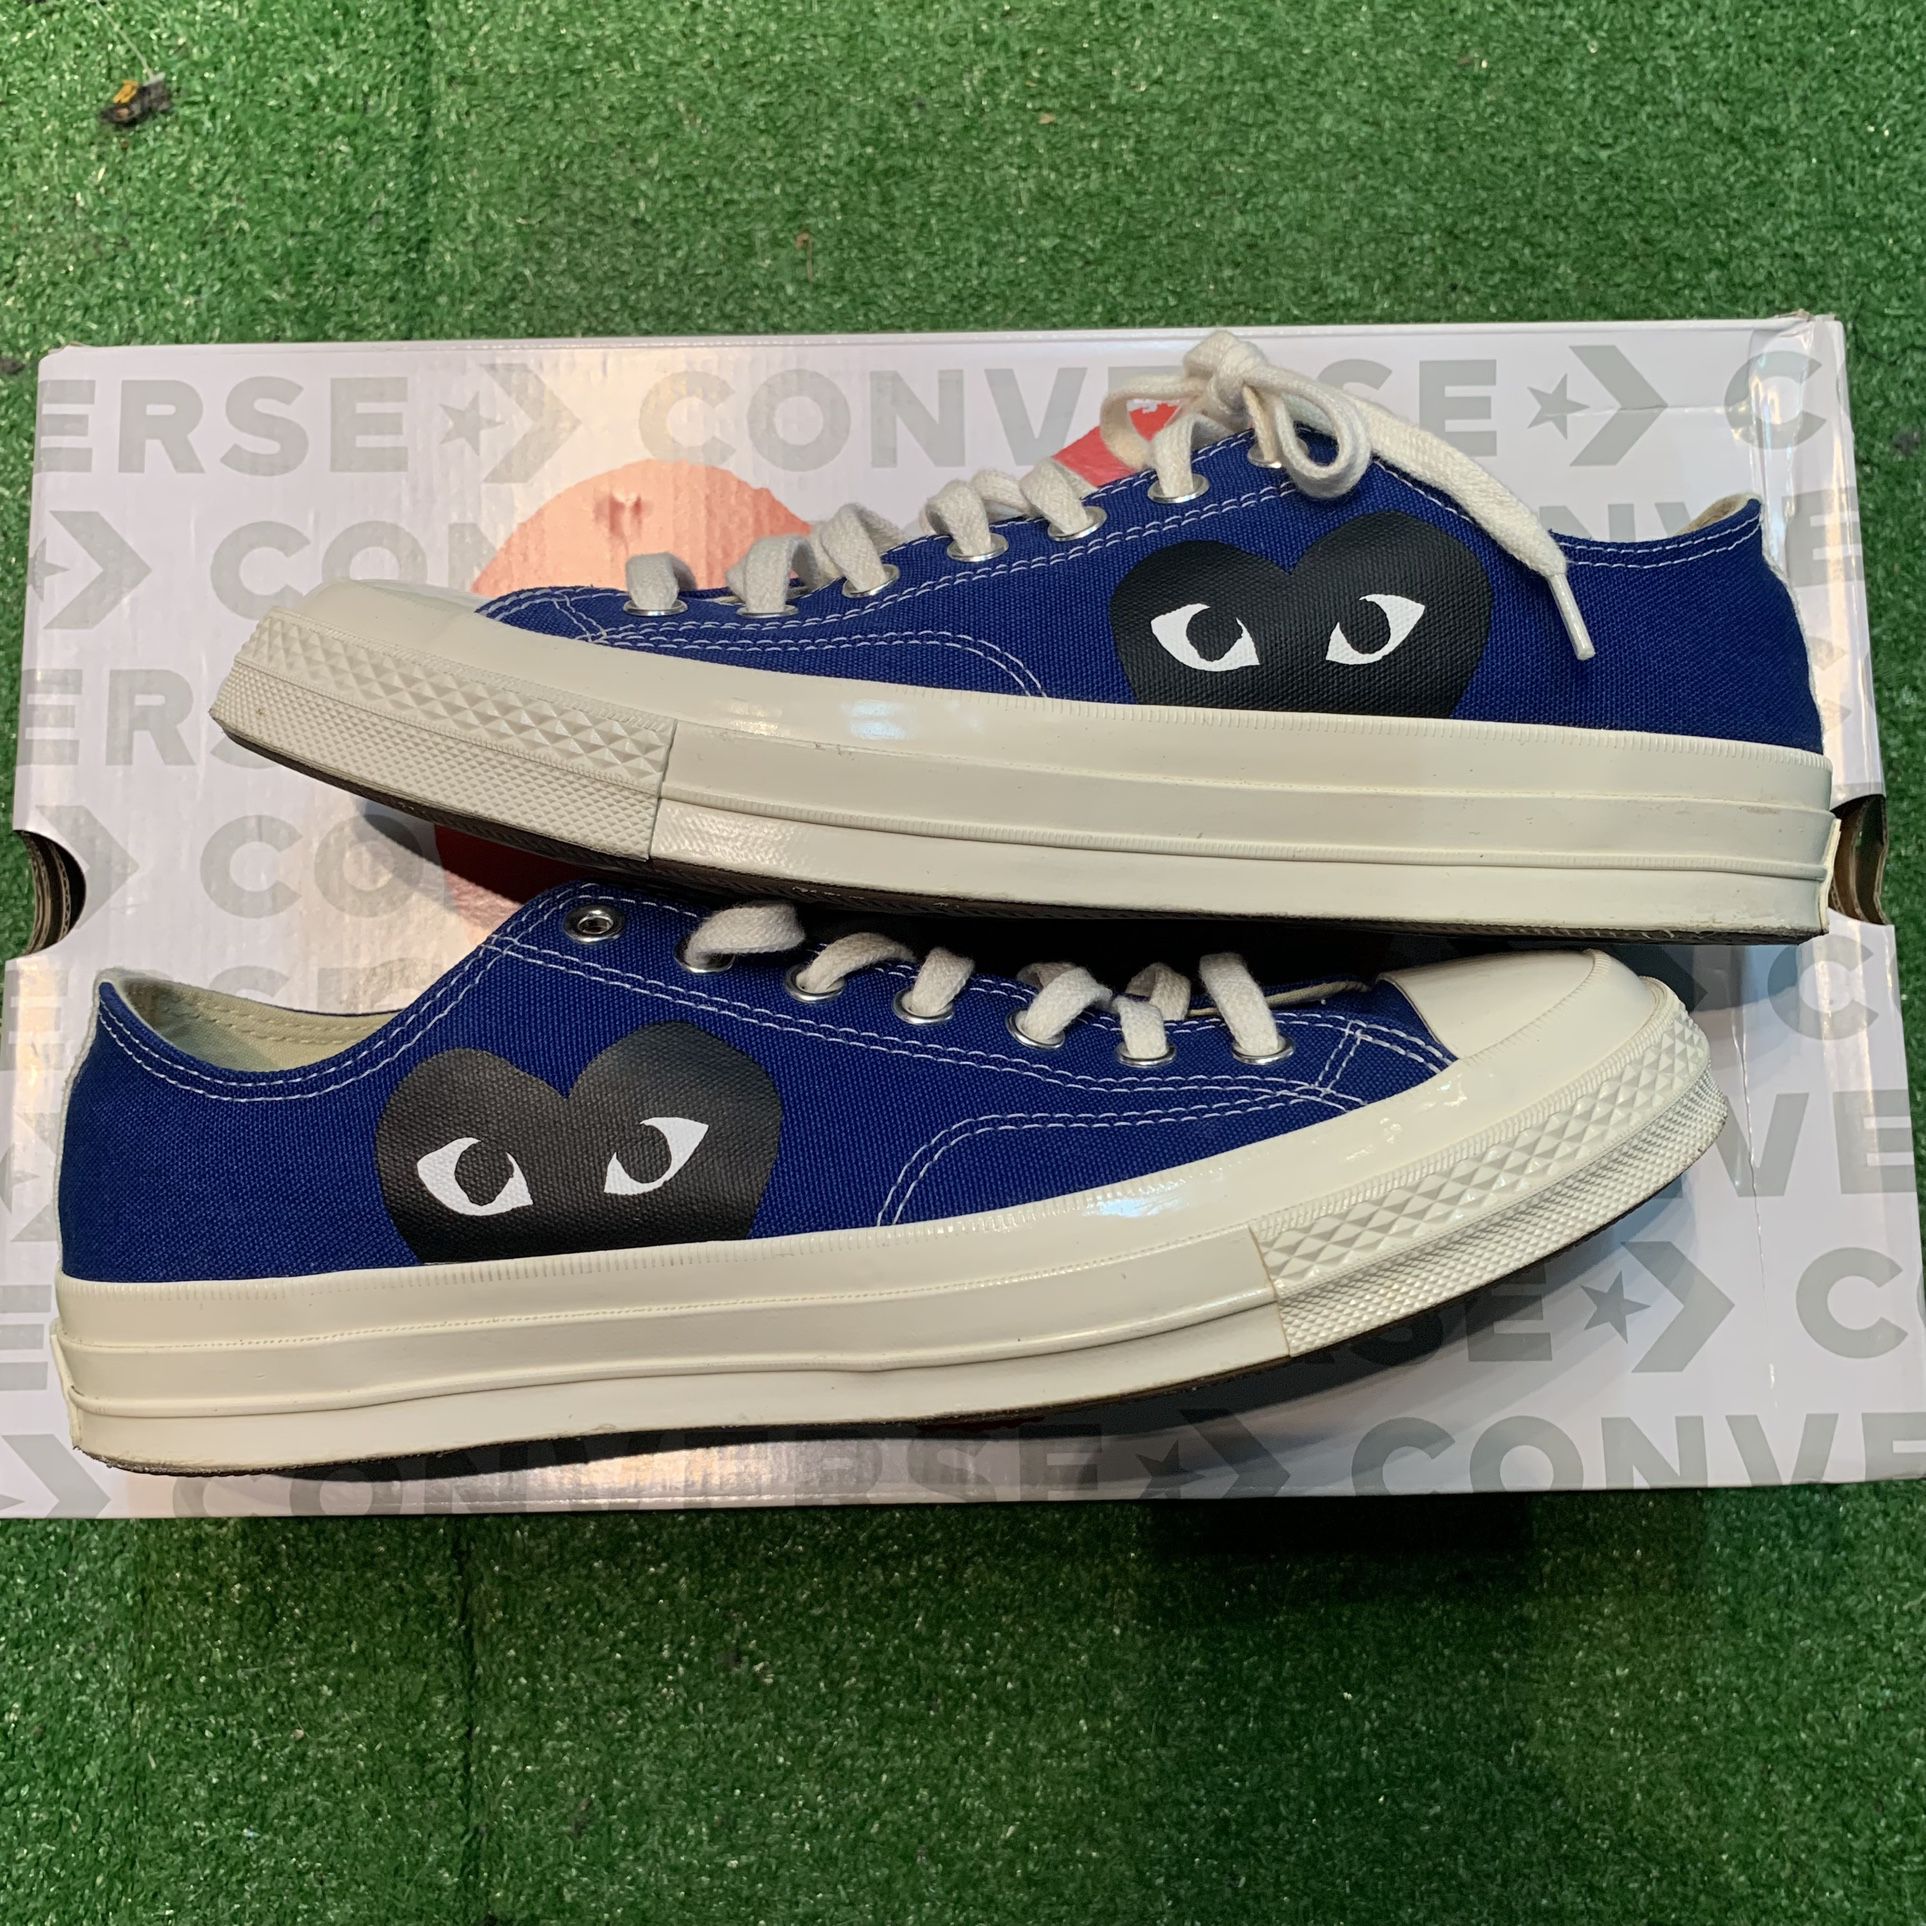 Converse CDG Blue Low 